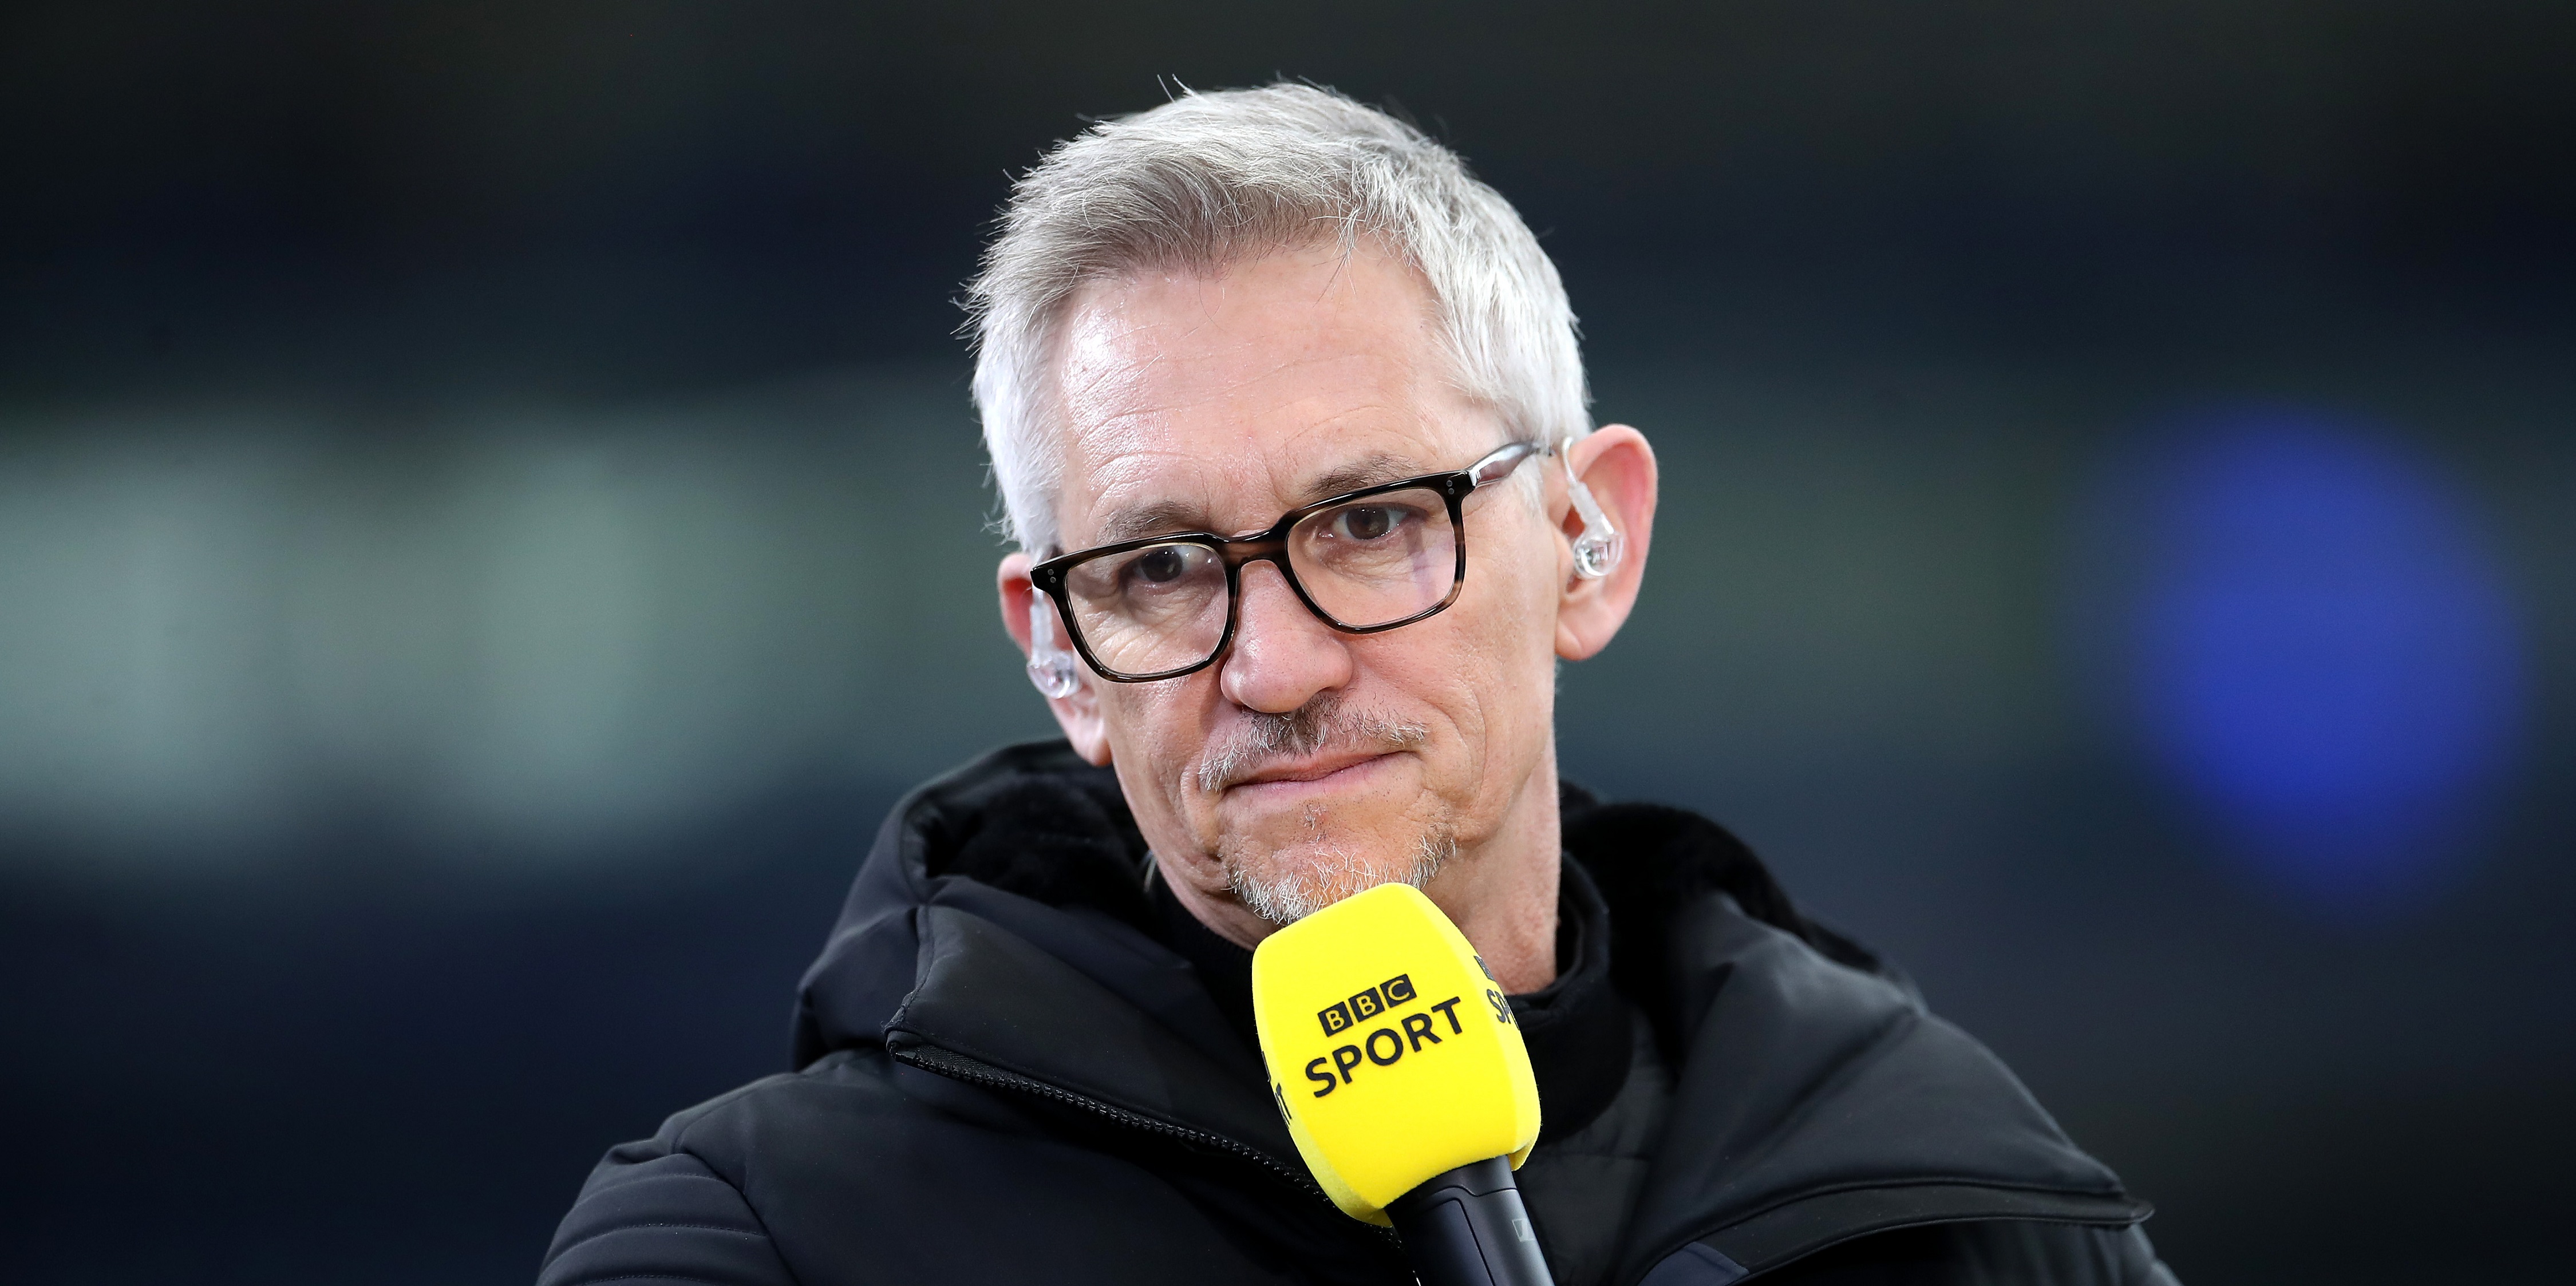 Lineker gushes over Liverpool star and makes ‘best passer of a football’ claim